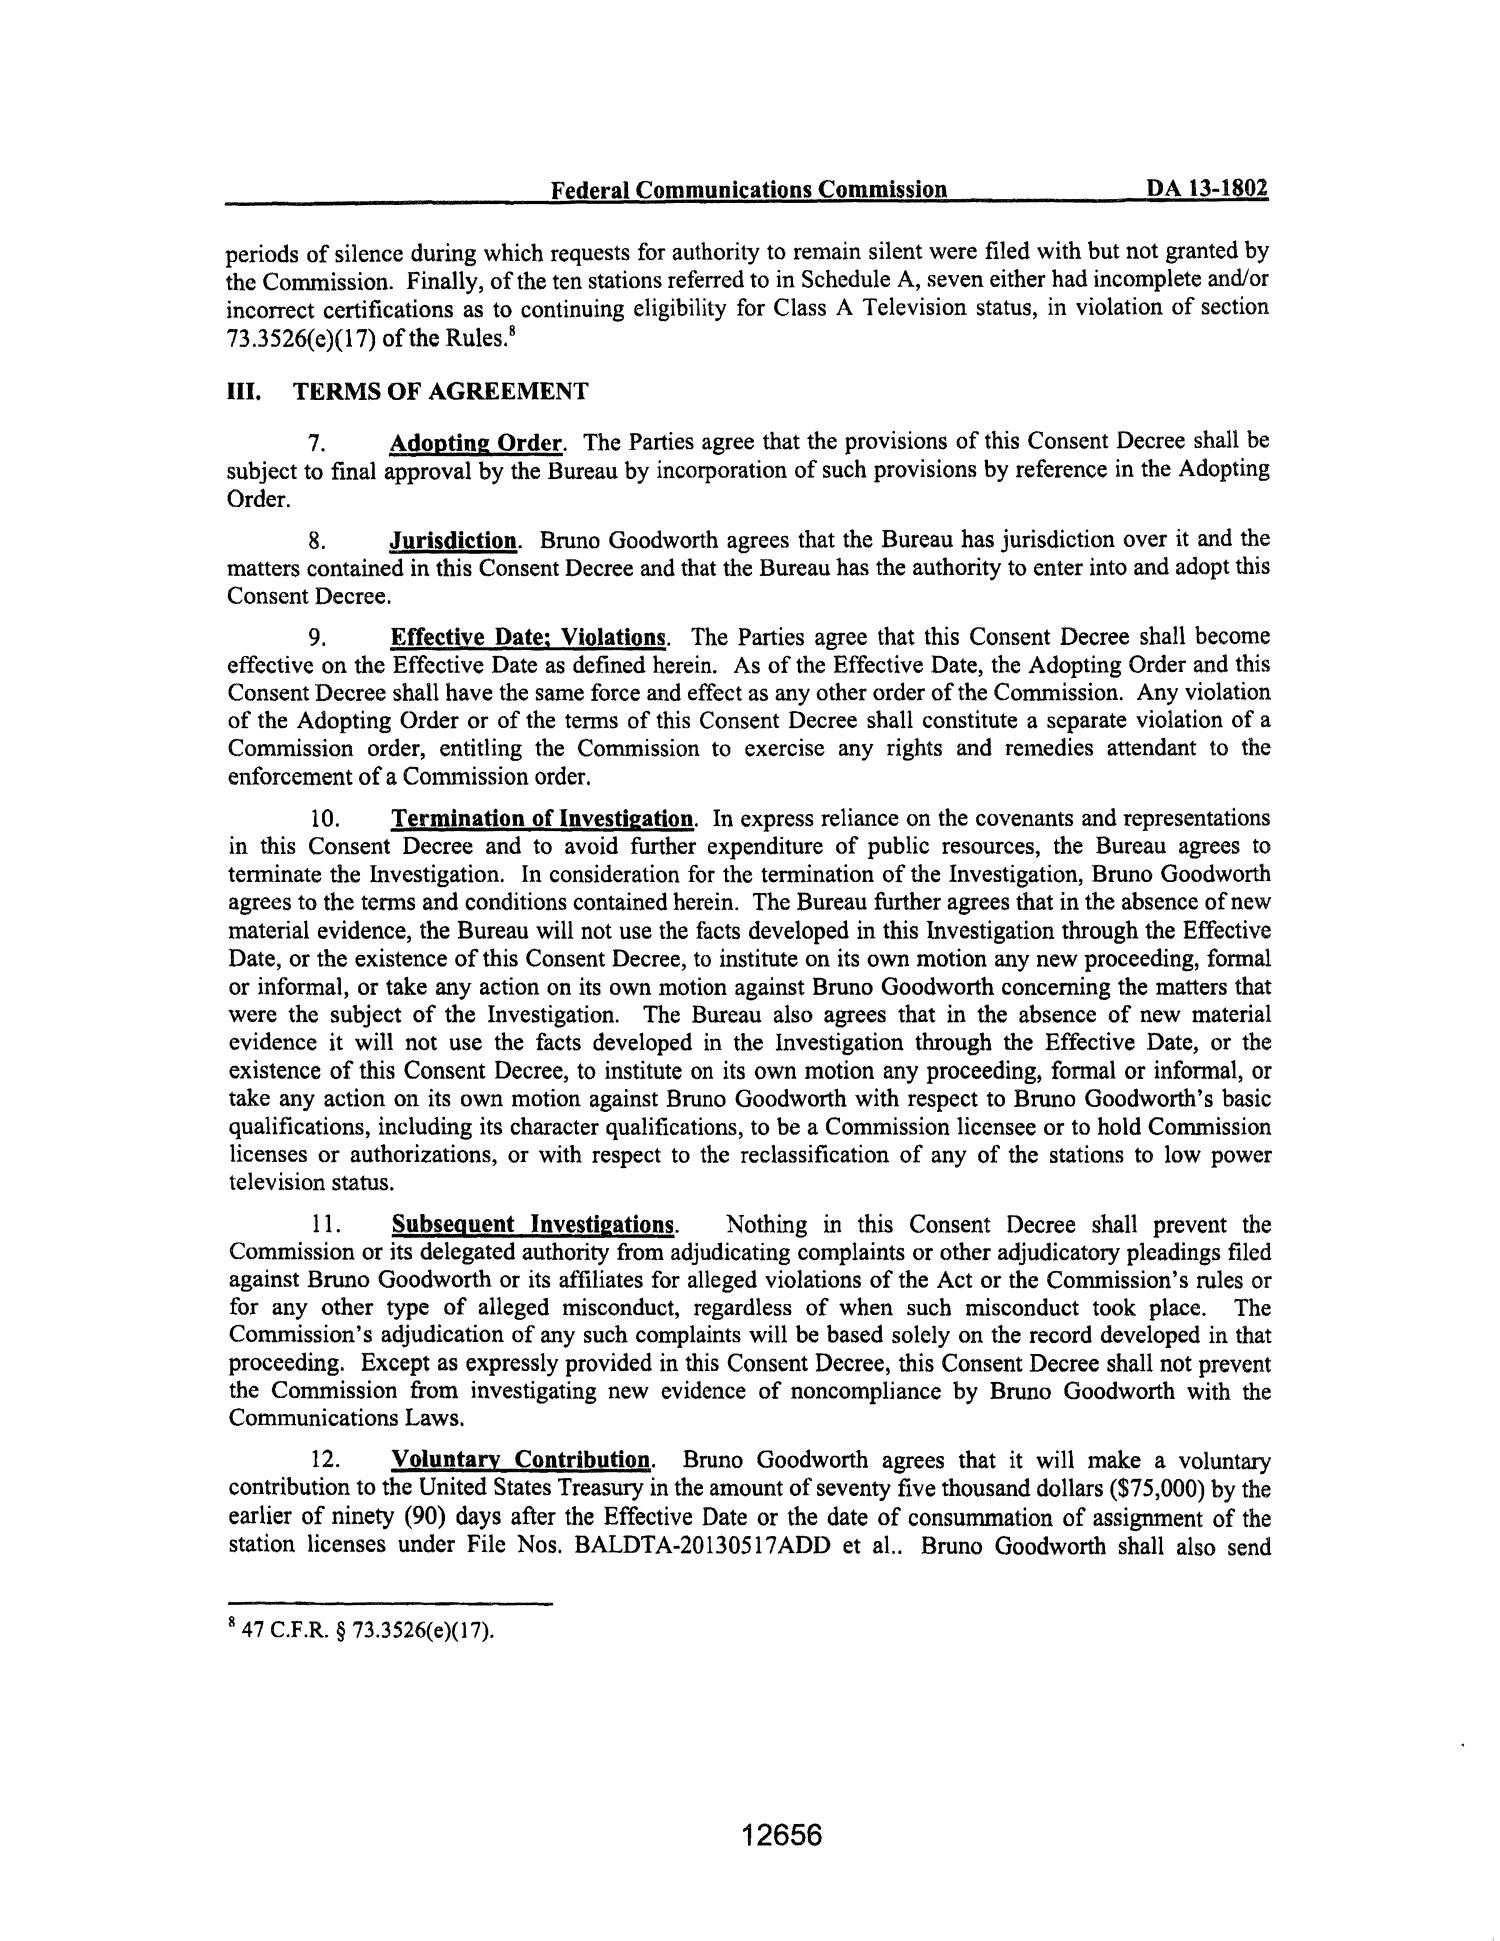 FCC Record, Volume 28, No. 16, Pages 12584 to 13565, August 22 - September 18, 2013
                                                
                                                    12656
                                                